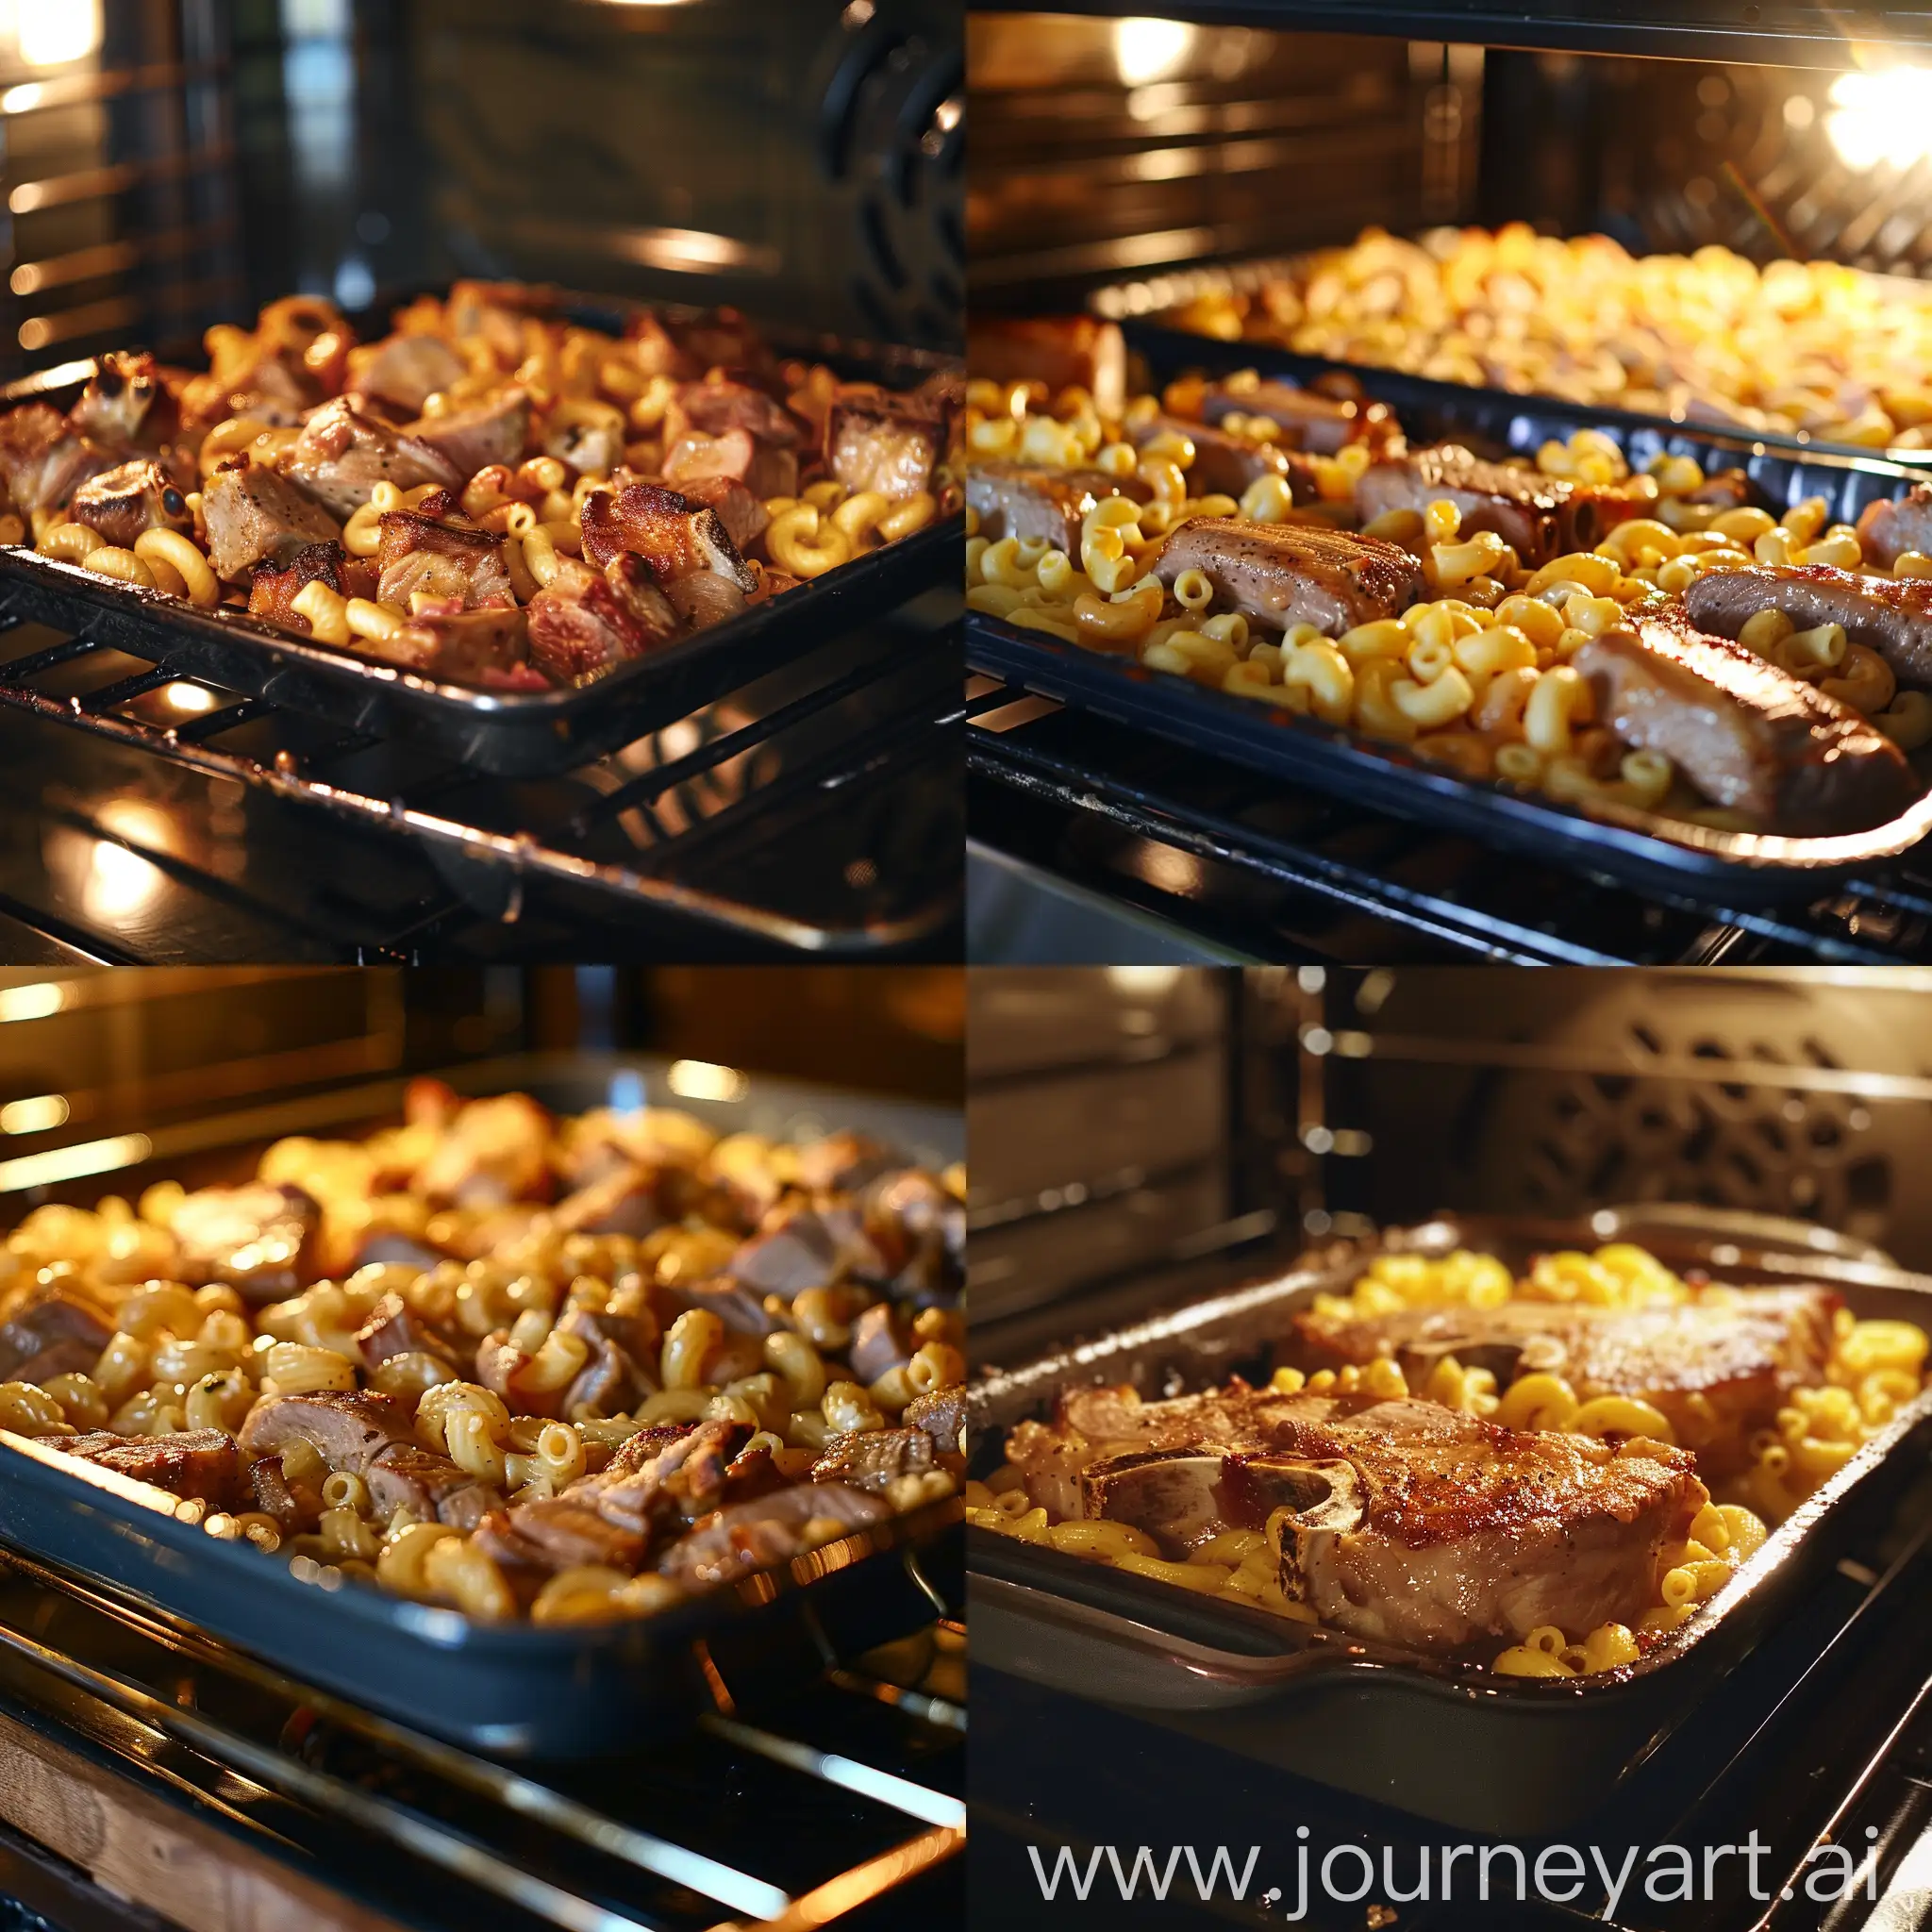 Delicious-Pork-and-Macaroni-Bake-in-the-Oven